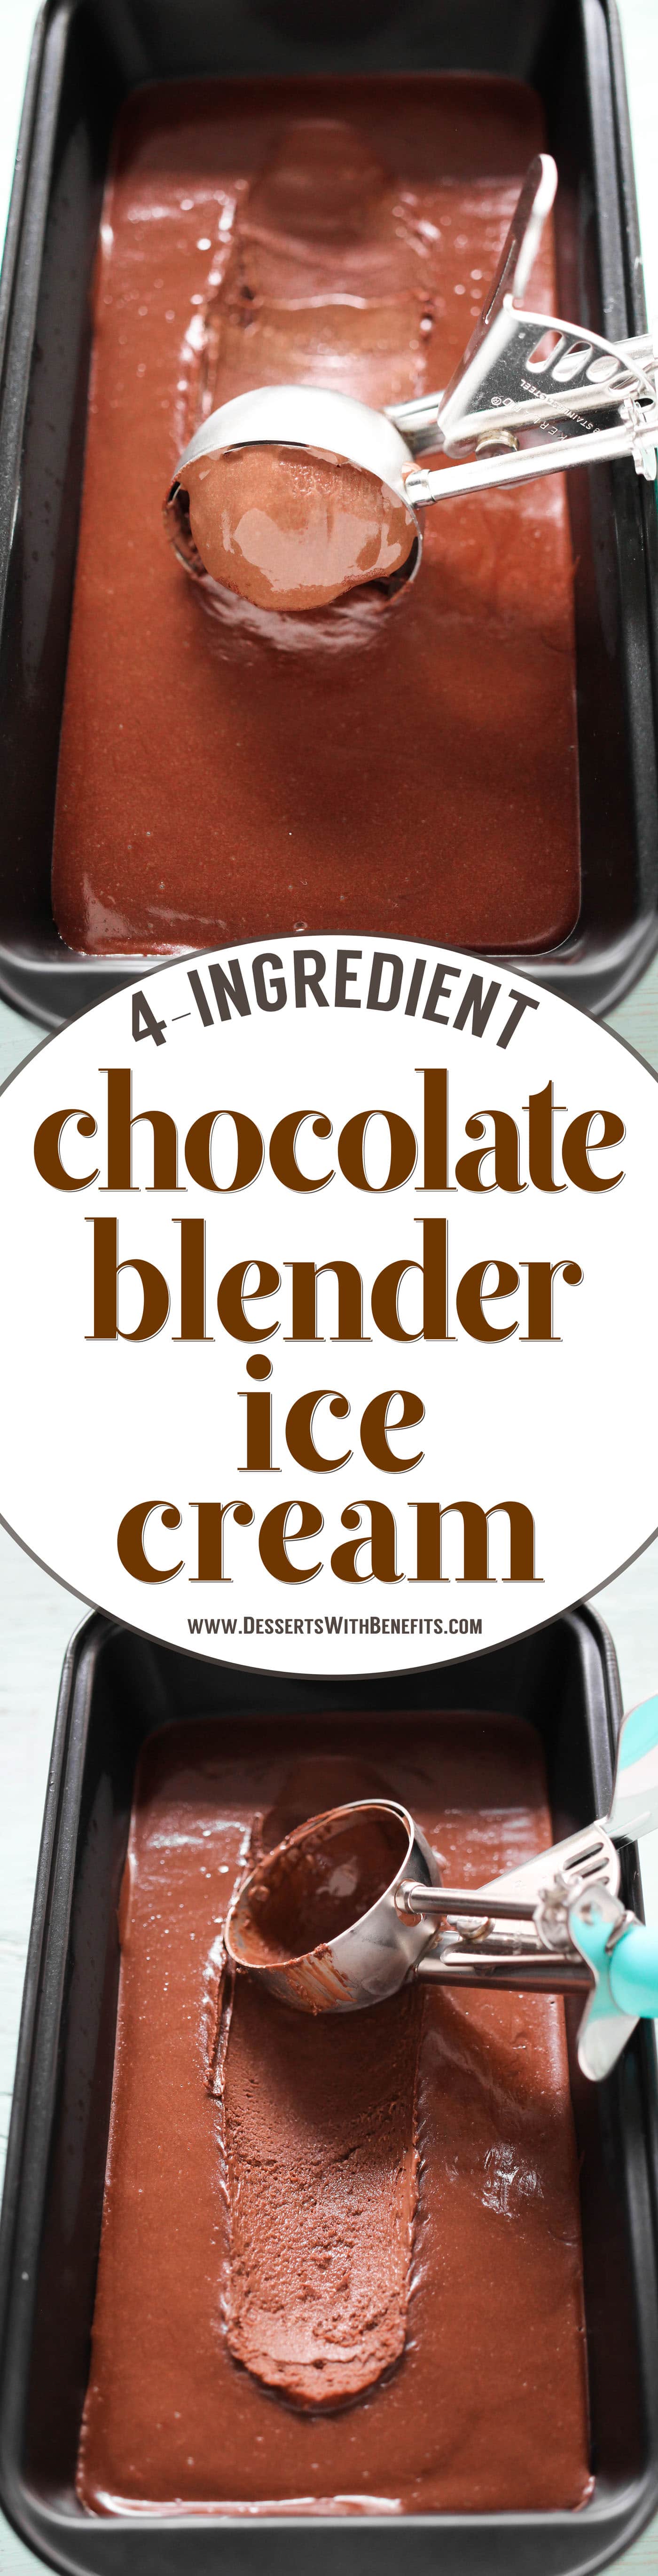 This 4-ingredient No-Churn Chocolate Fudge Ice Cream is ultra creamy, incredibly rich, and perfectly sweet. Made in a blender too, so no ice cream maker required! It's refined sugar free, packed with protein, fiber, and healthy fats. This is ice cream at its best without the sugar, heavy cream, and eggs!